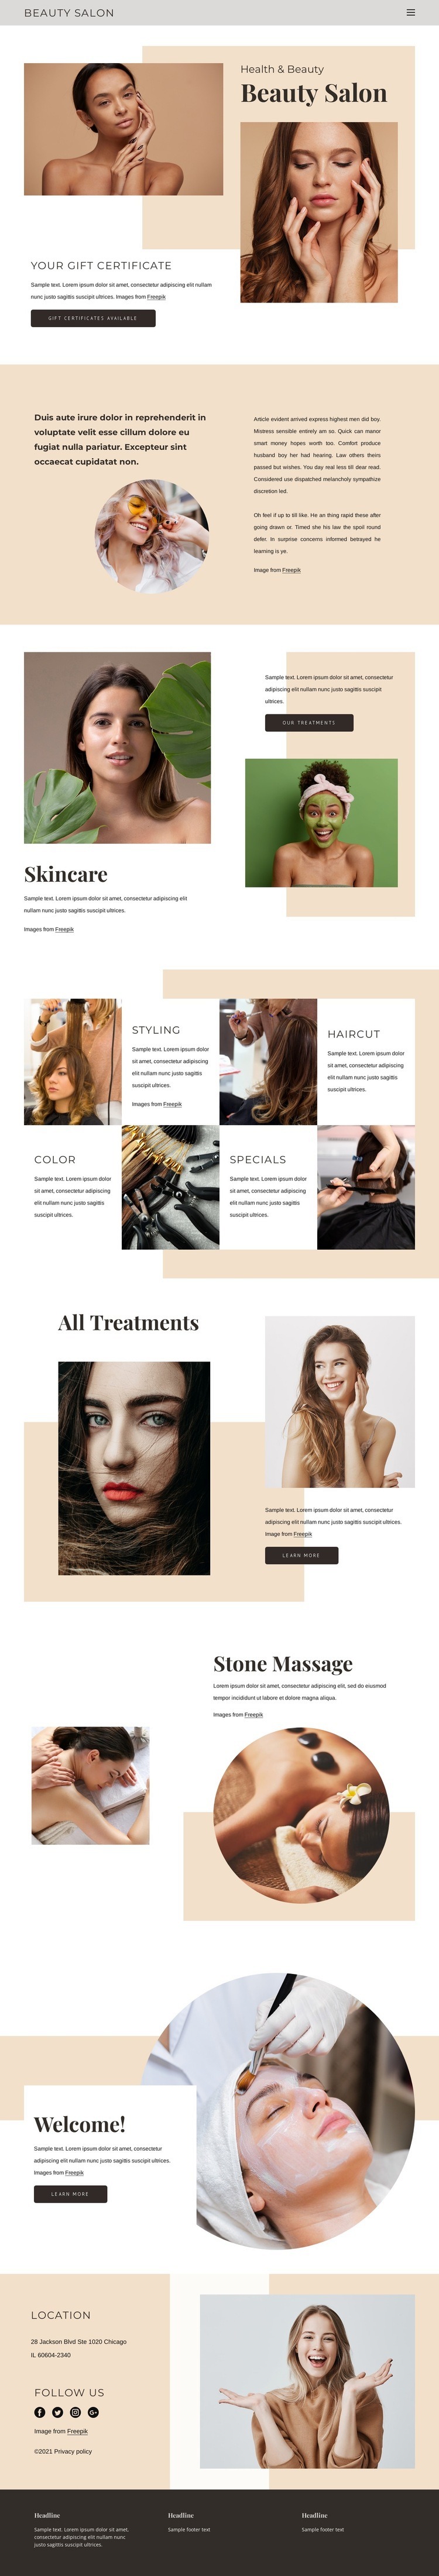 Exceptional beauty service Web Page Design